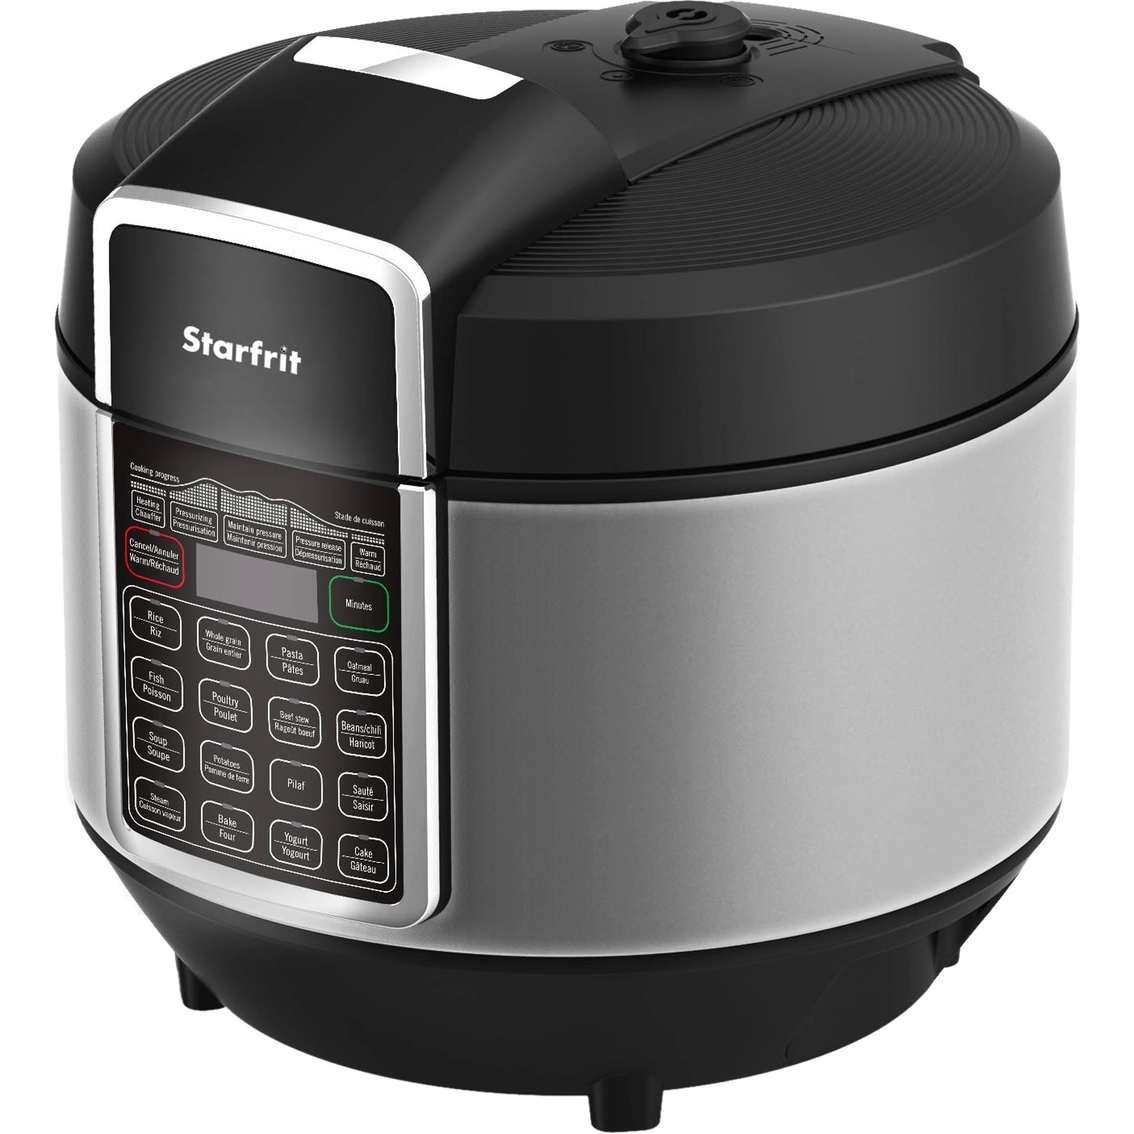 Starfrit Electric Pressure Cooker - Image 2 of 10